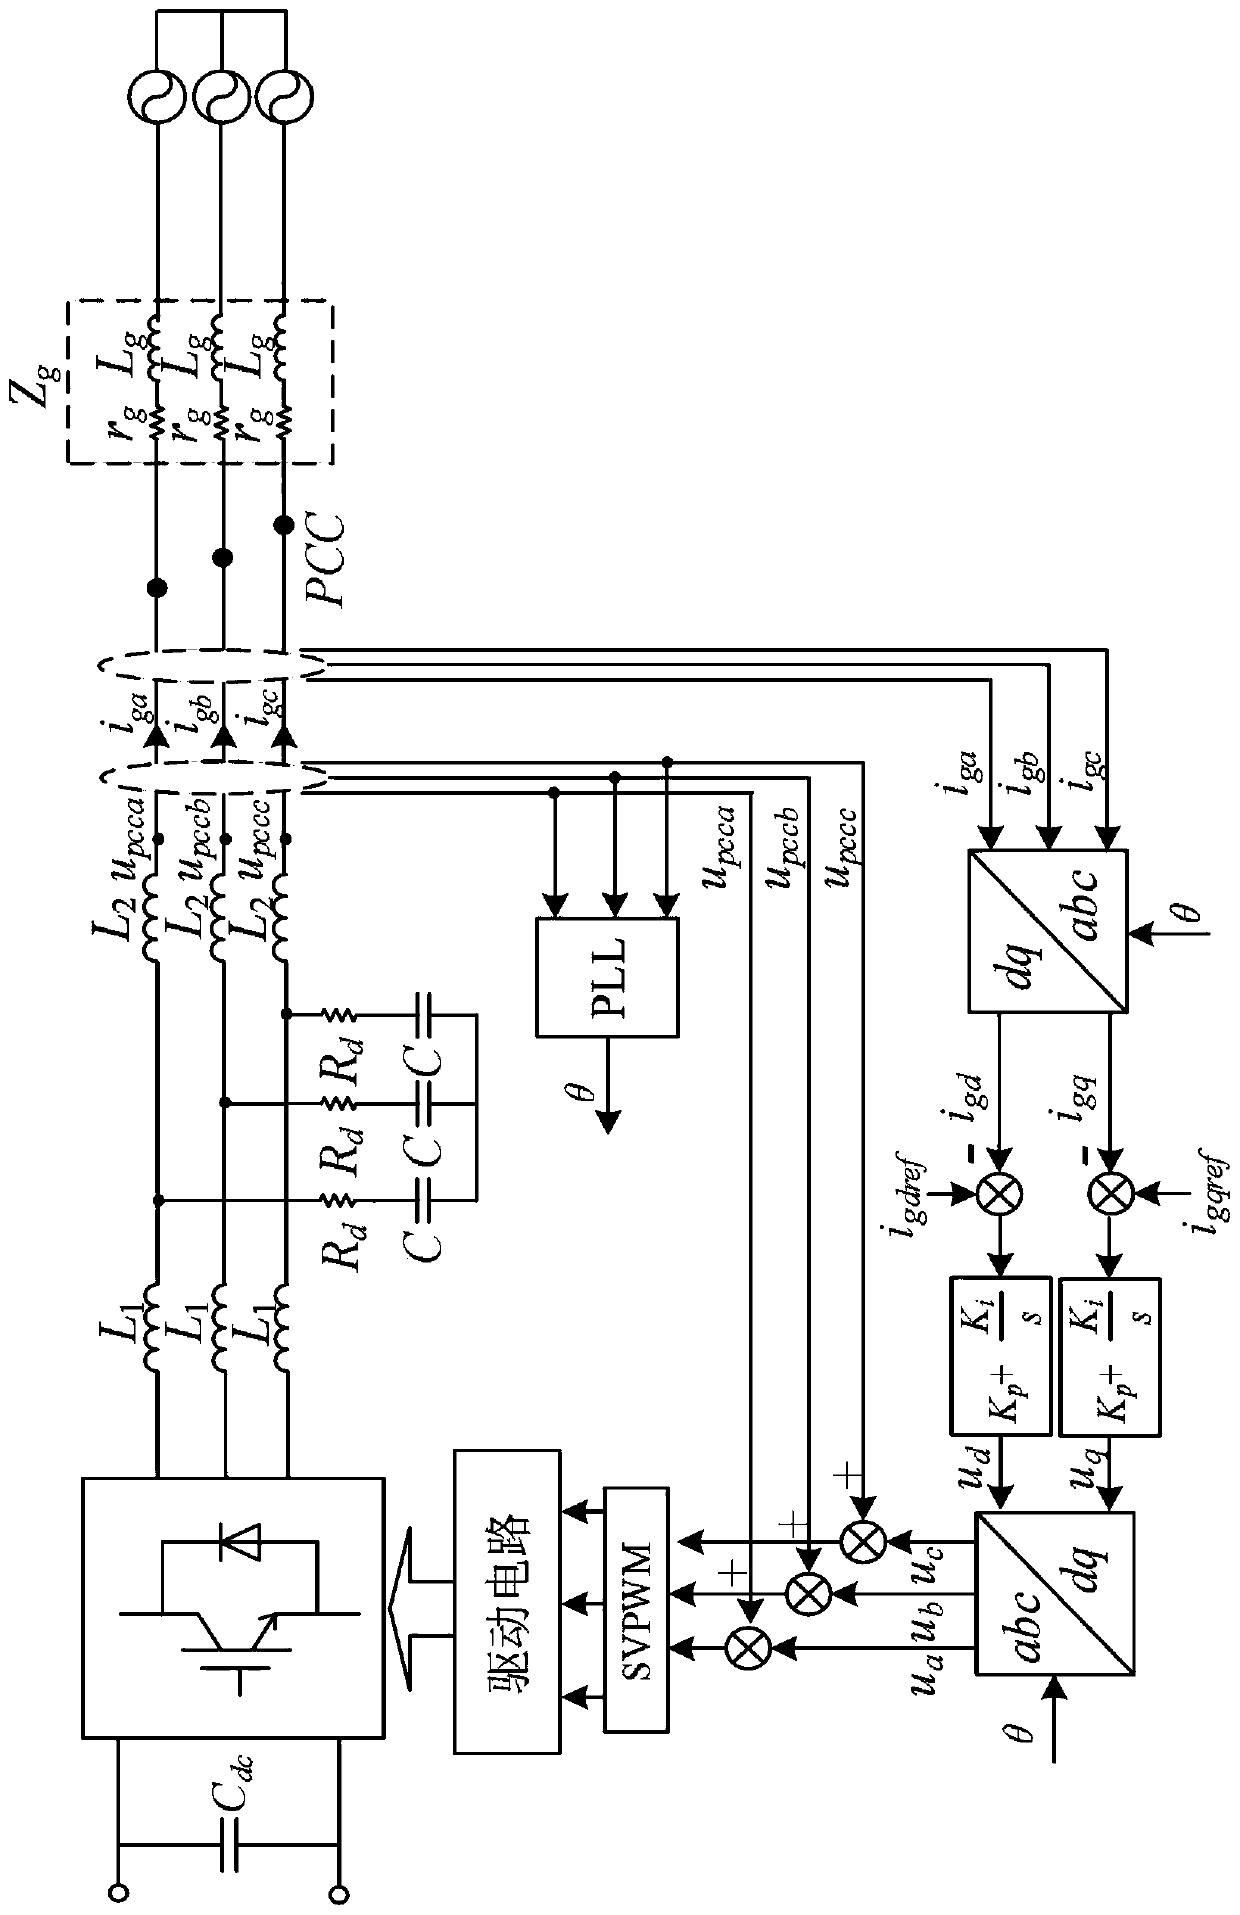 Stability control method for multi-inverter system based on mode adaptation in weak grid